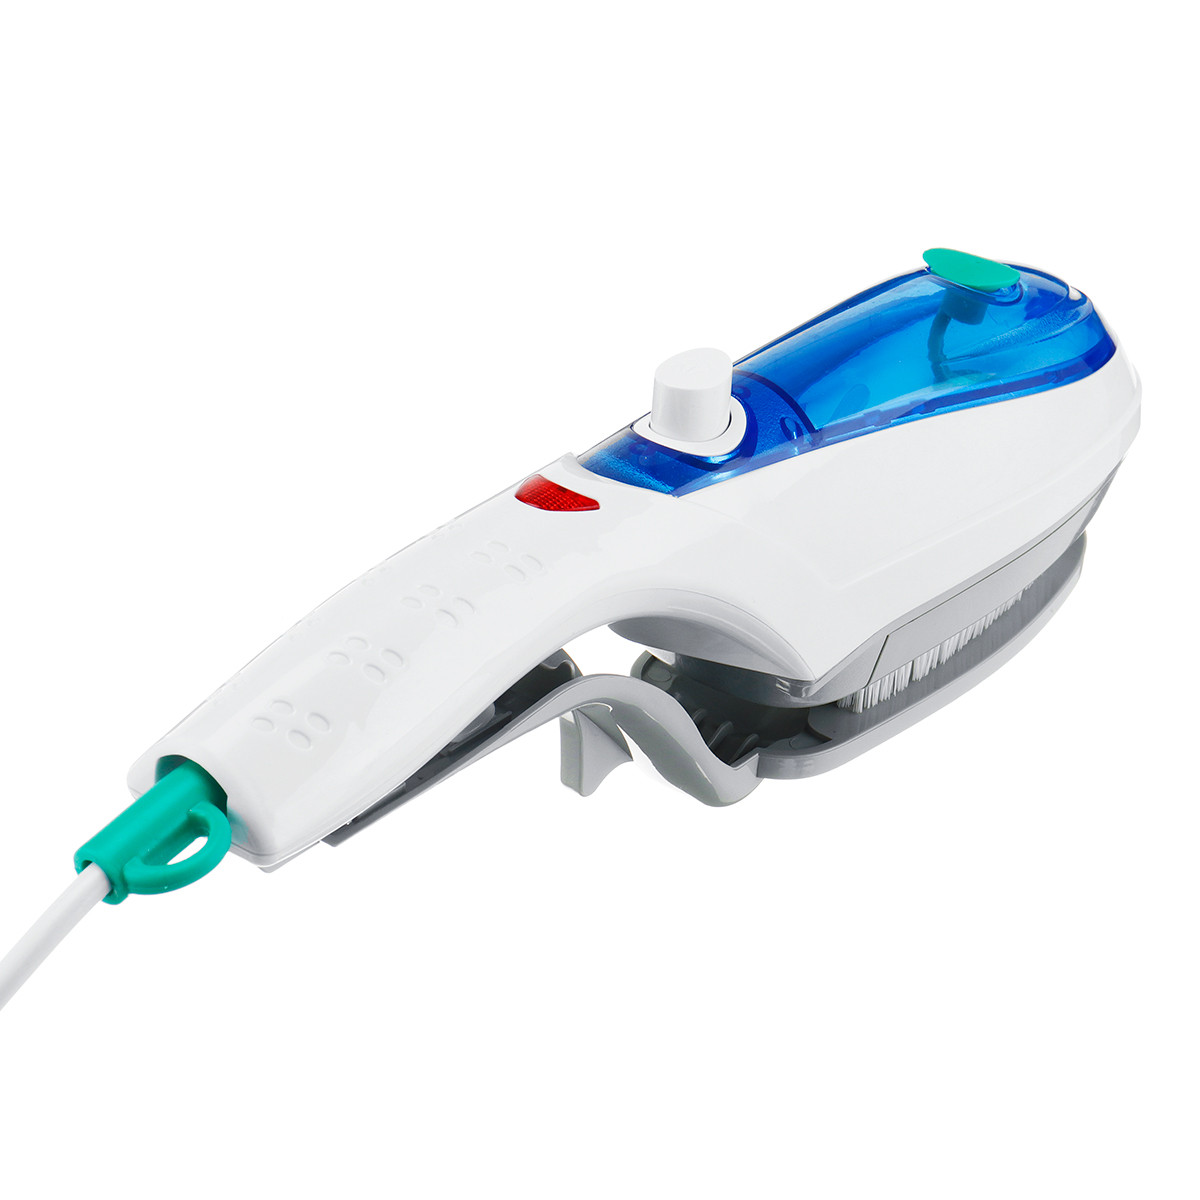 Protable-1000W-Electric-Steam-Iron-Handheld-Fabric-Laundry-Steamer-Brush-Travel-Soldering-Iron-Tips-1589841-7